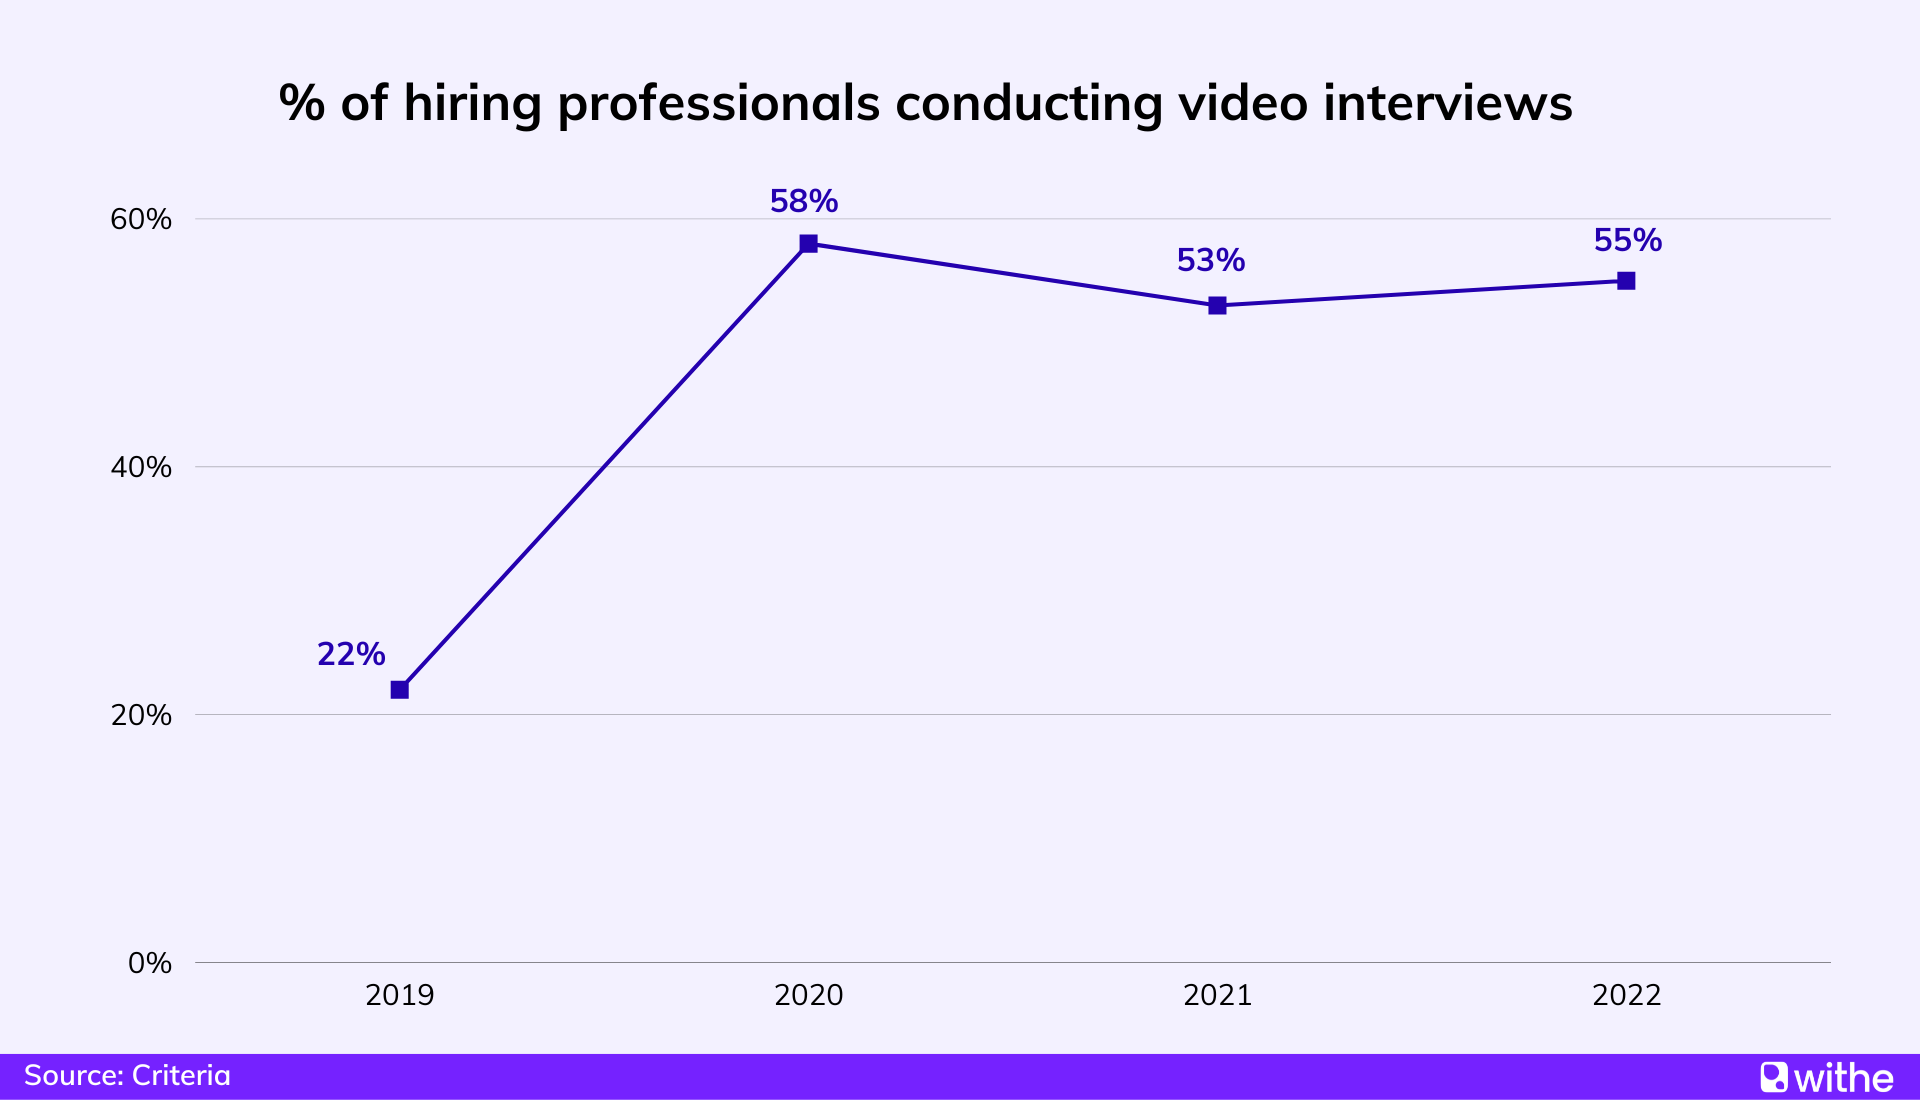 Job interview statistics - The percentage of hiring professionals that conduct video interviews from 2019 to 2022